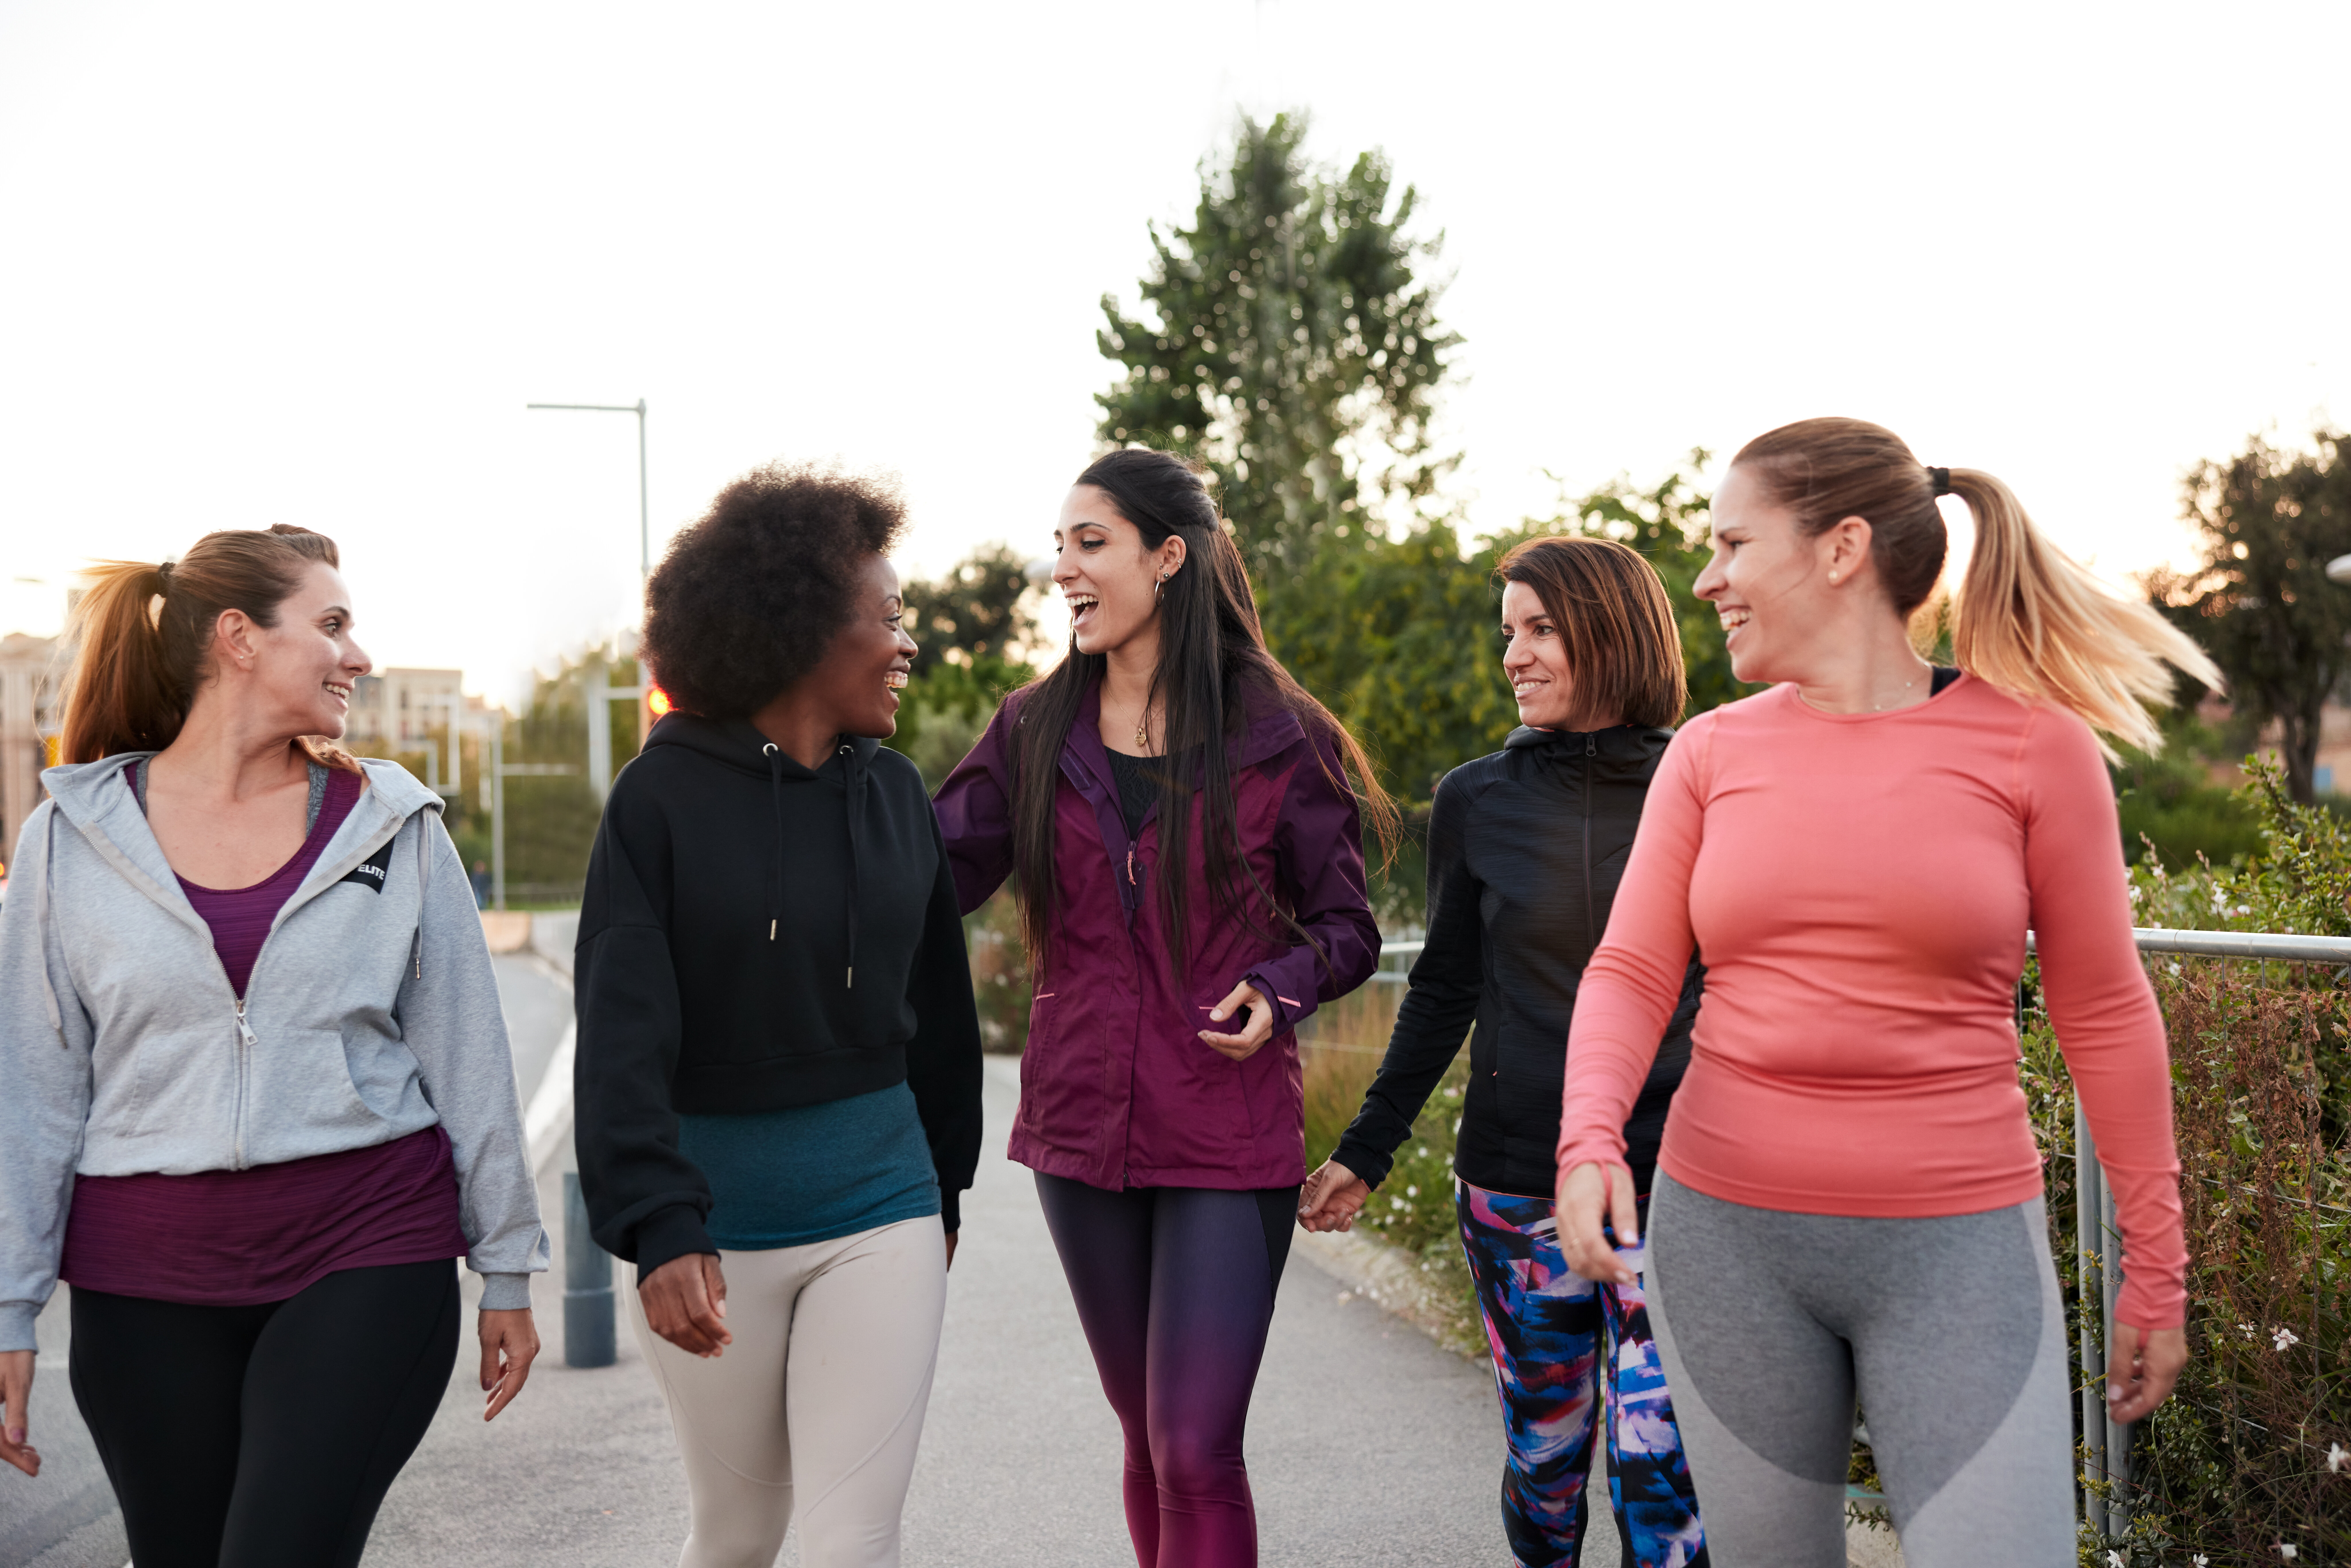 A group of women in athletic wear walking and talking together outdoors